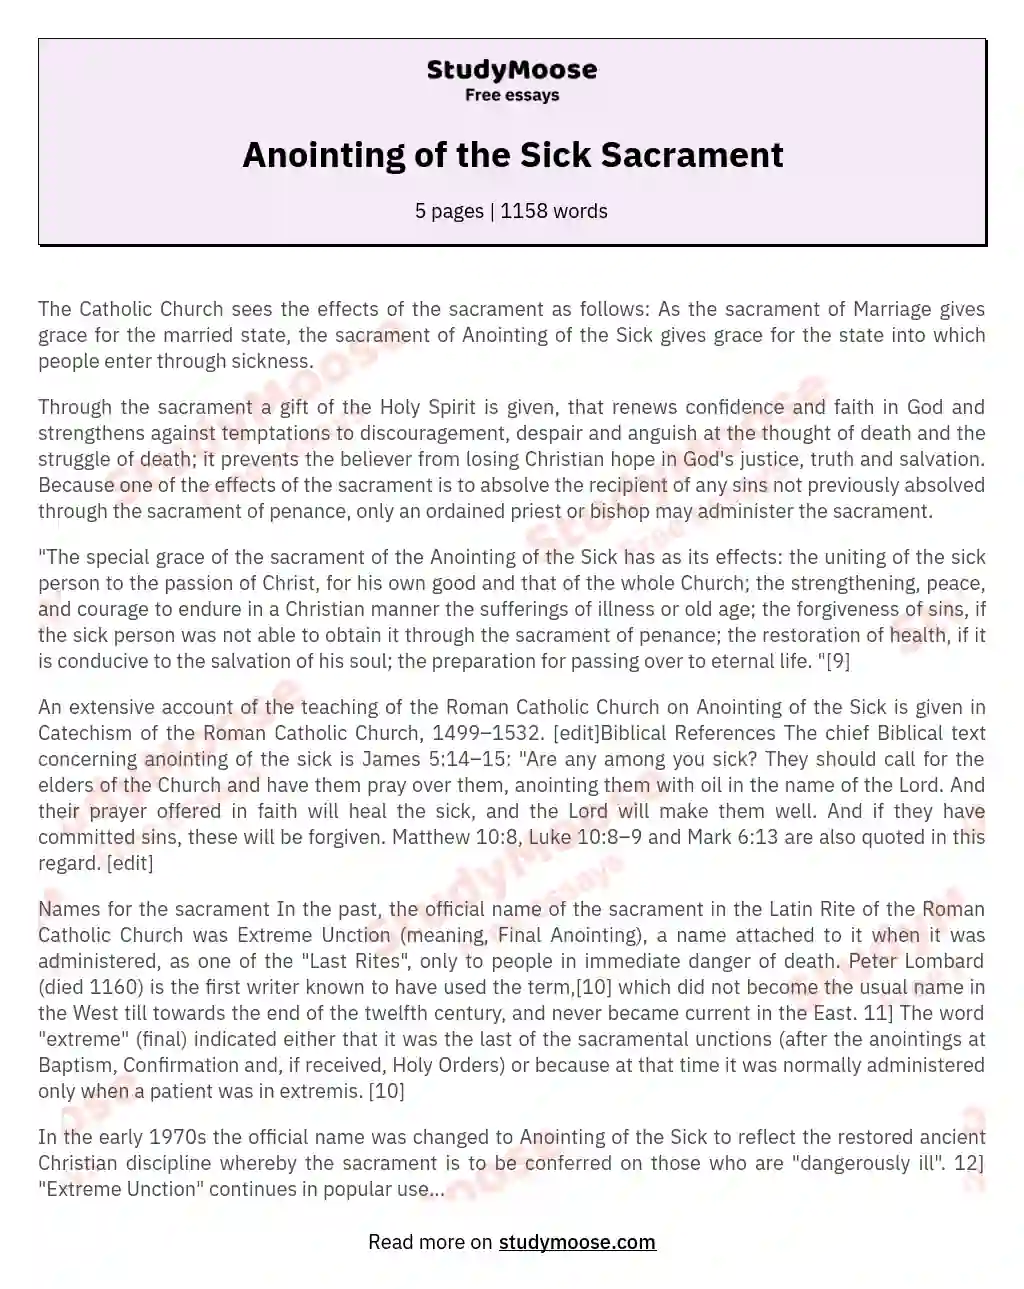 Anointing of the Sick Sacrament essay